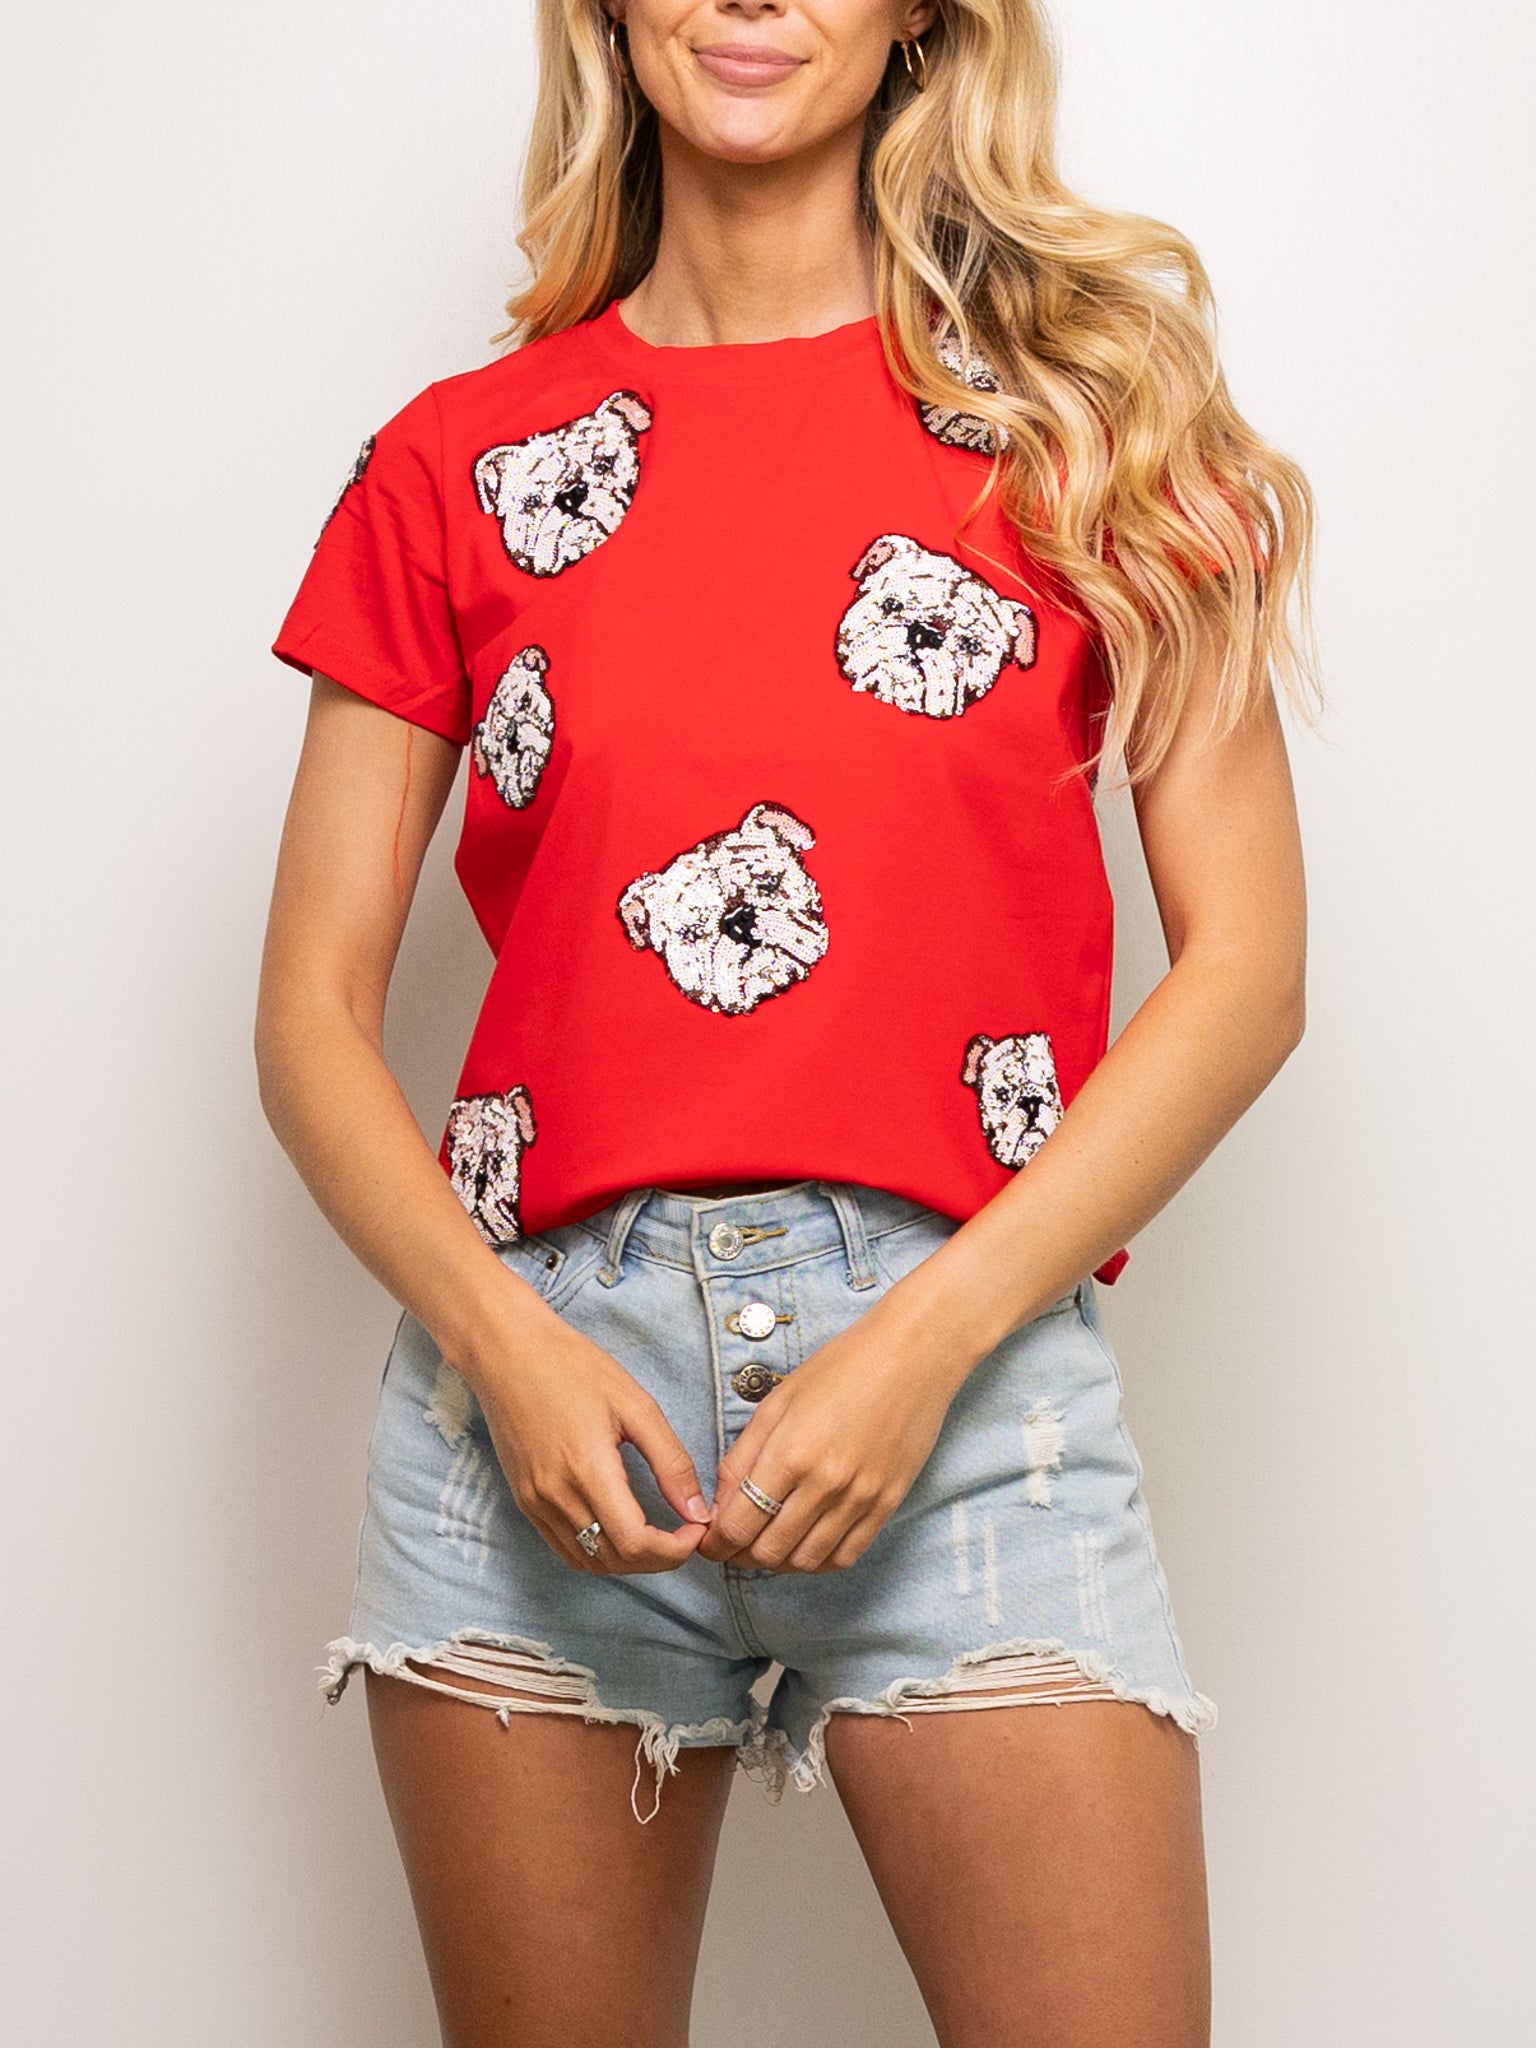 Bulldog Takeover Tee- Red